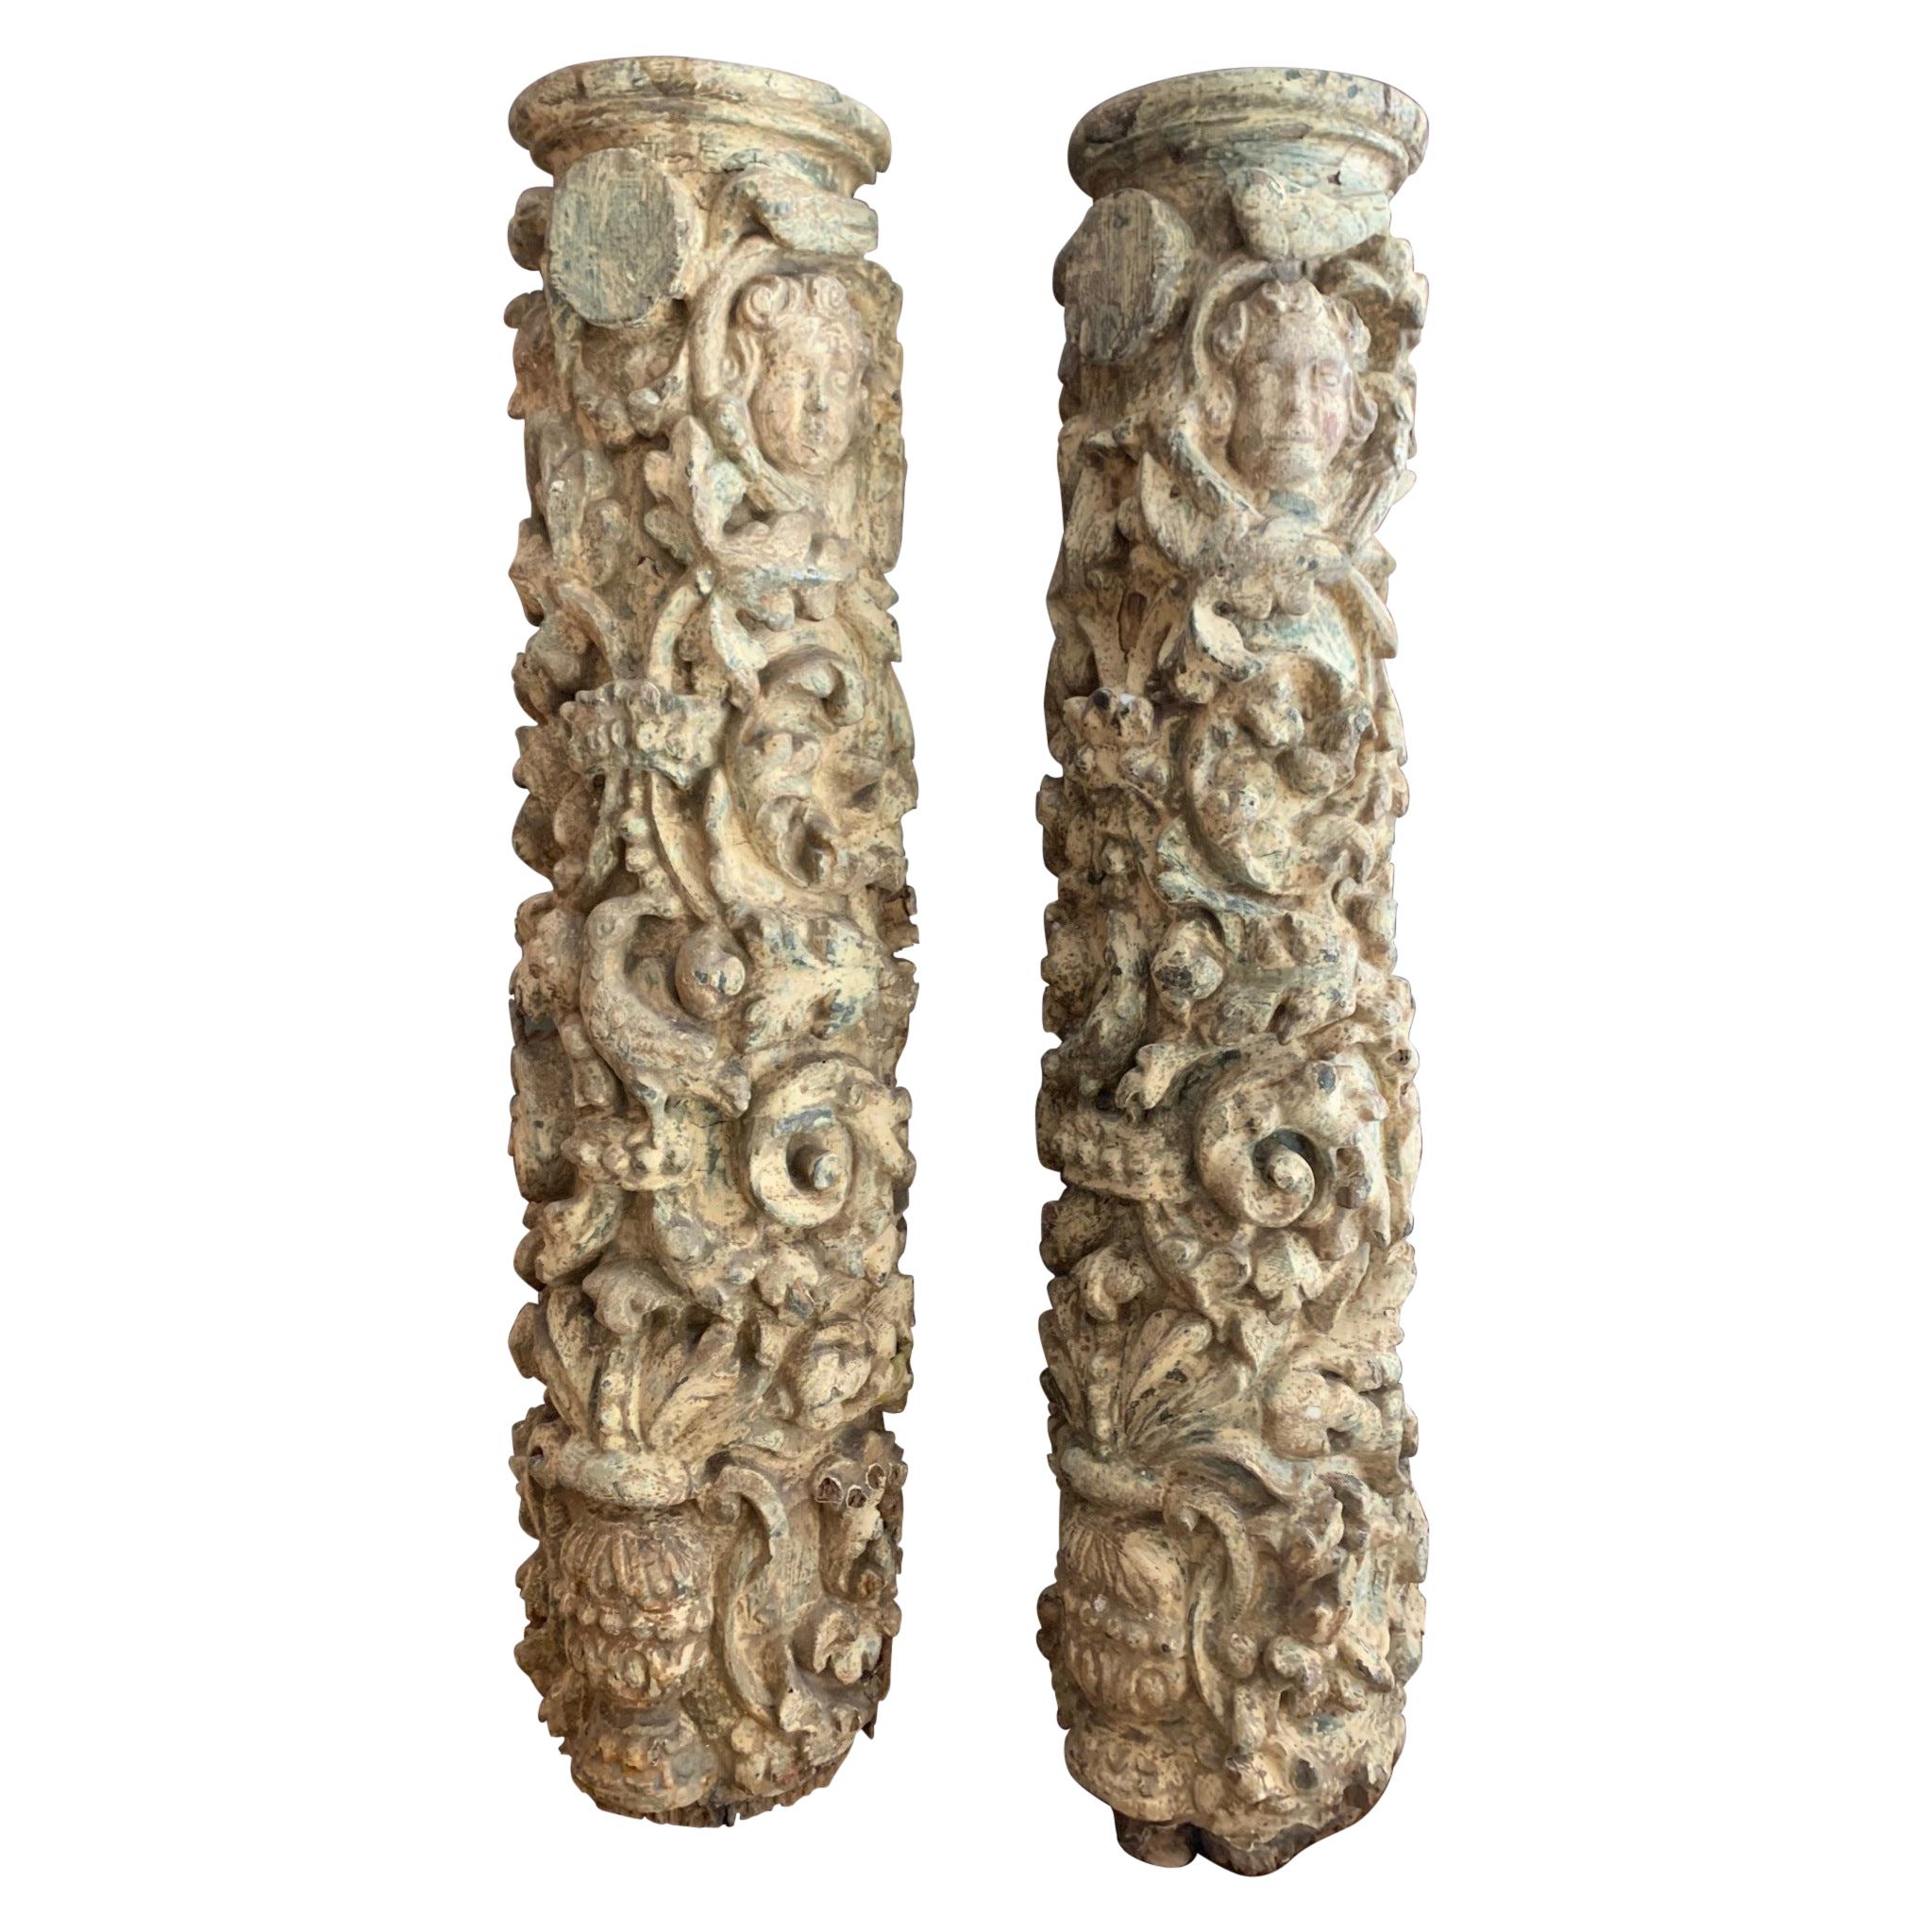 Pair of 17th Century Carved and Polychromed Wood Portuguese Columns